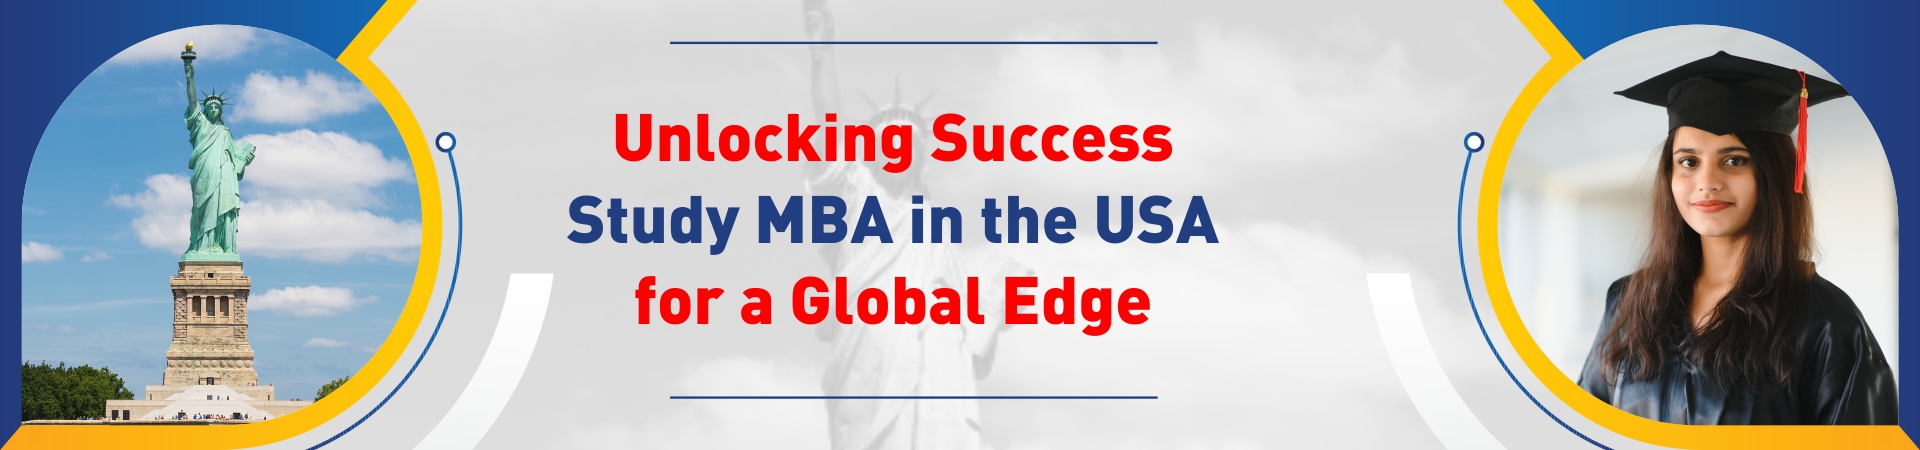 Unlocking Success: Study MBA in the USA for a Global Edge